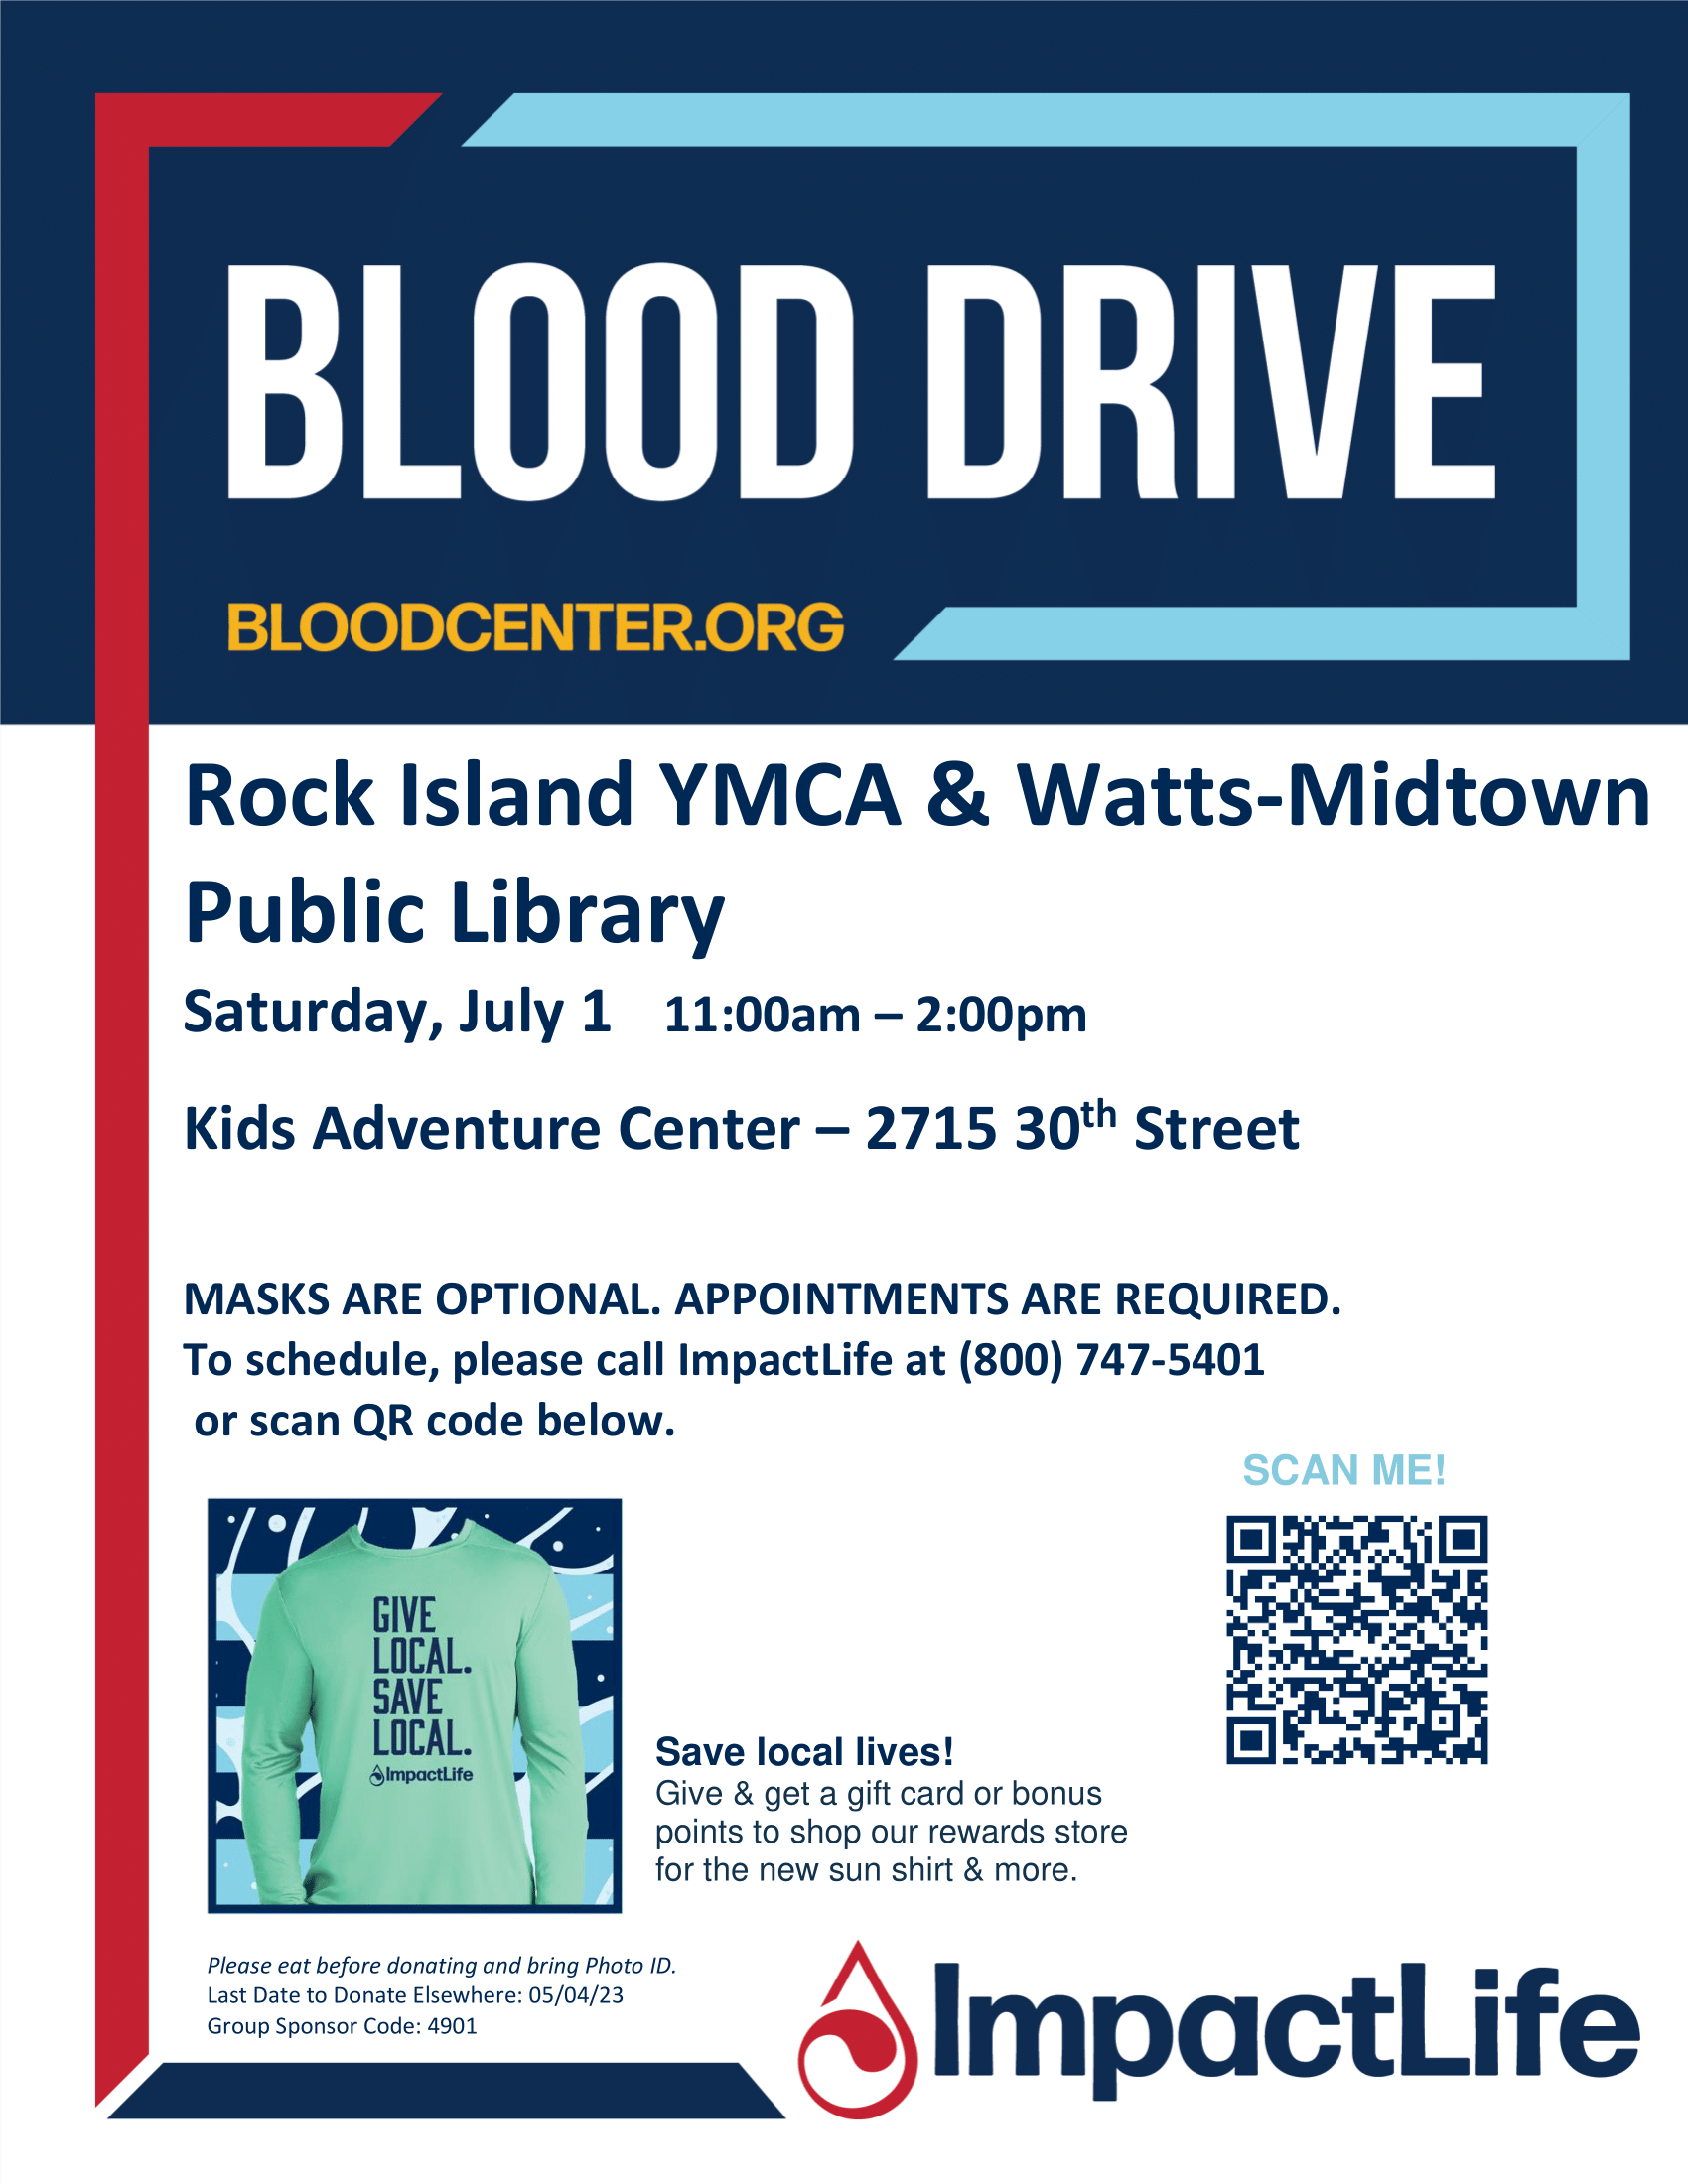 Rock Island YMCA and RIPL Blood Drive Poster